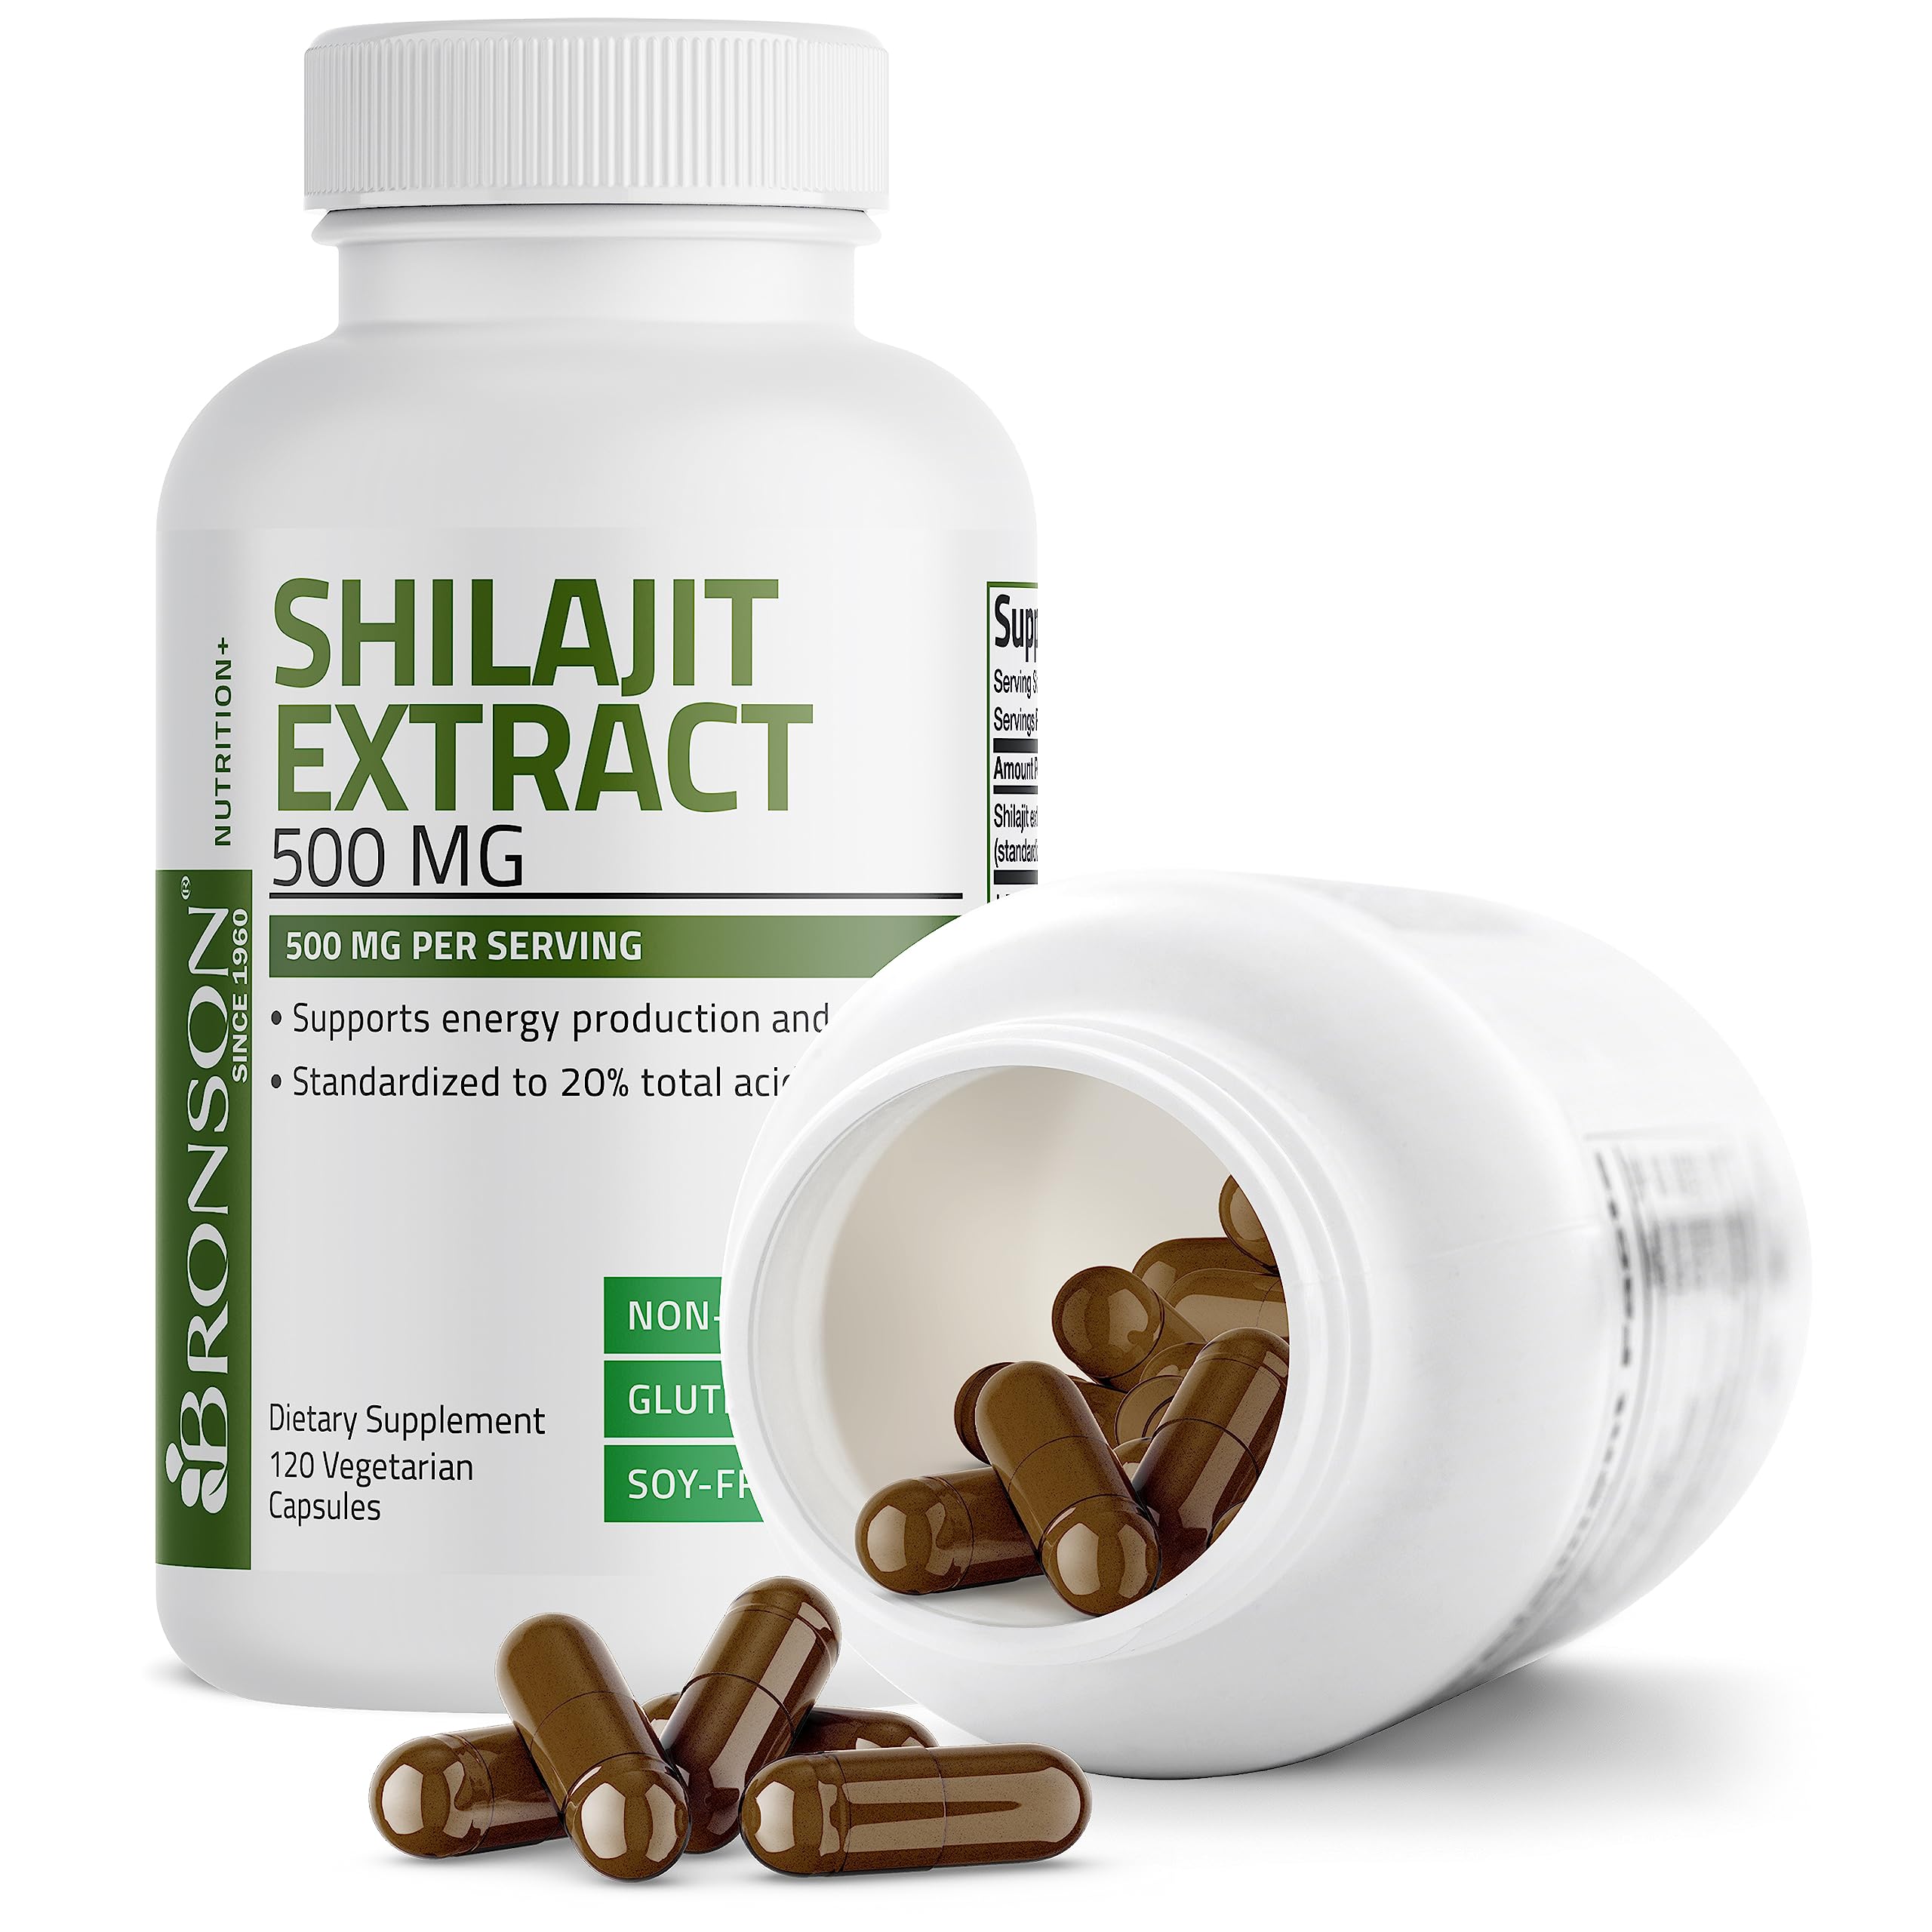 Shilajit Extract - 500 mg view 9 of 6